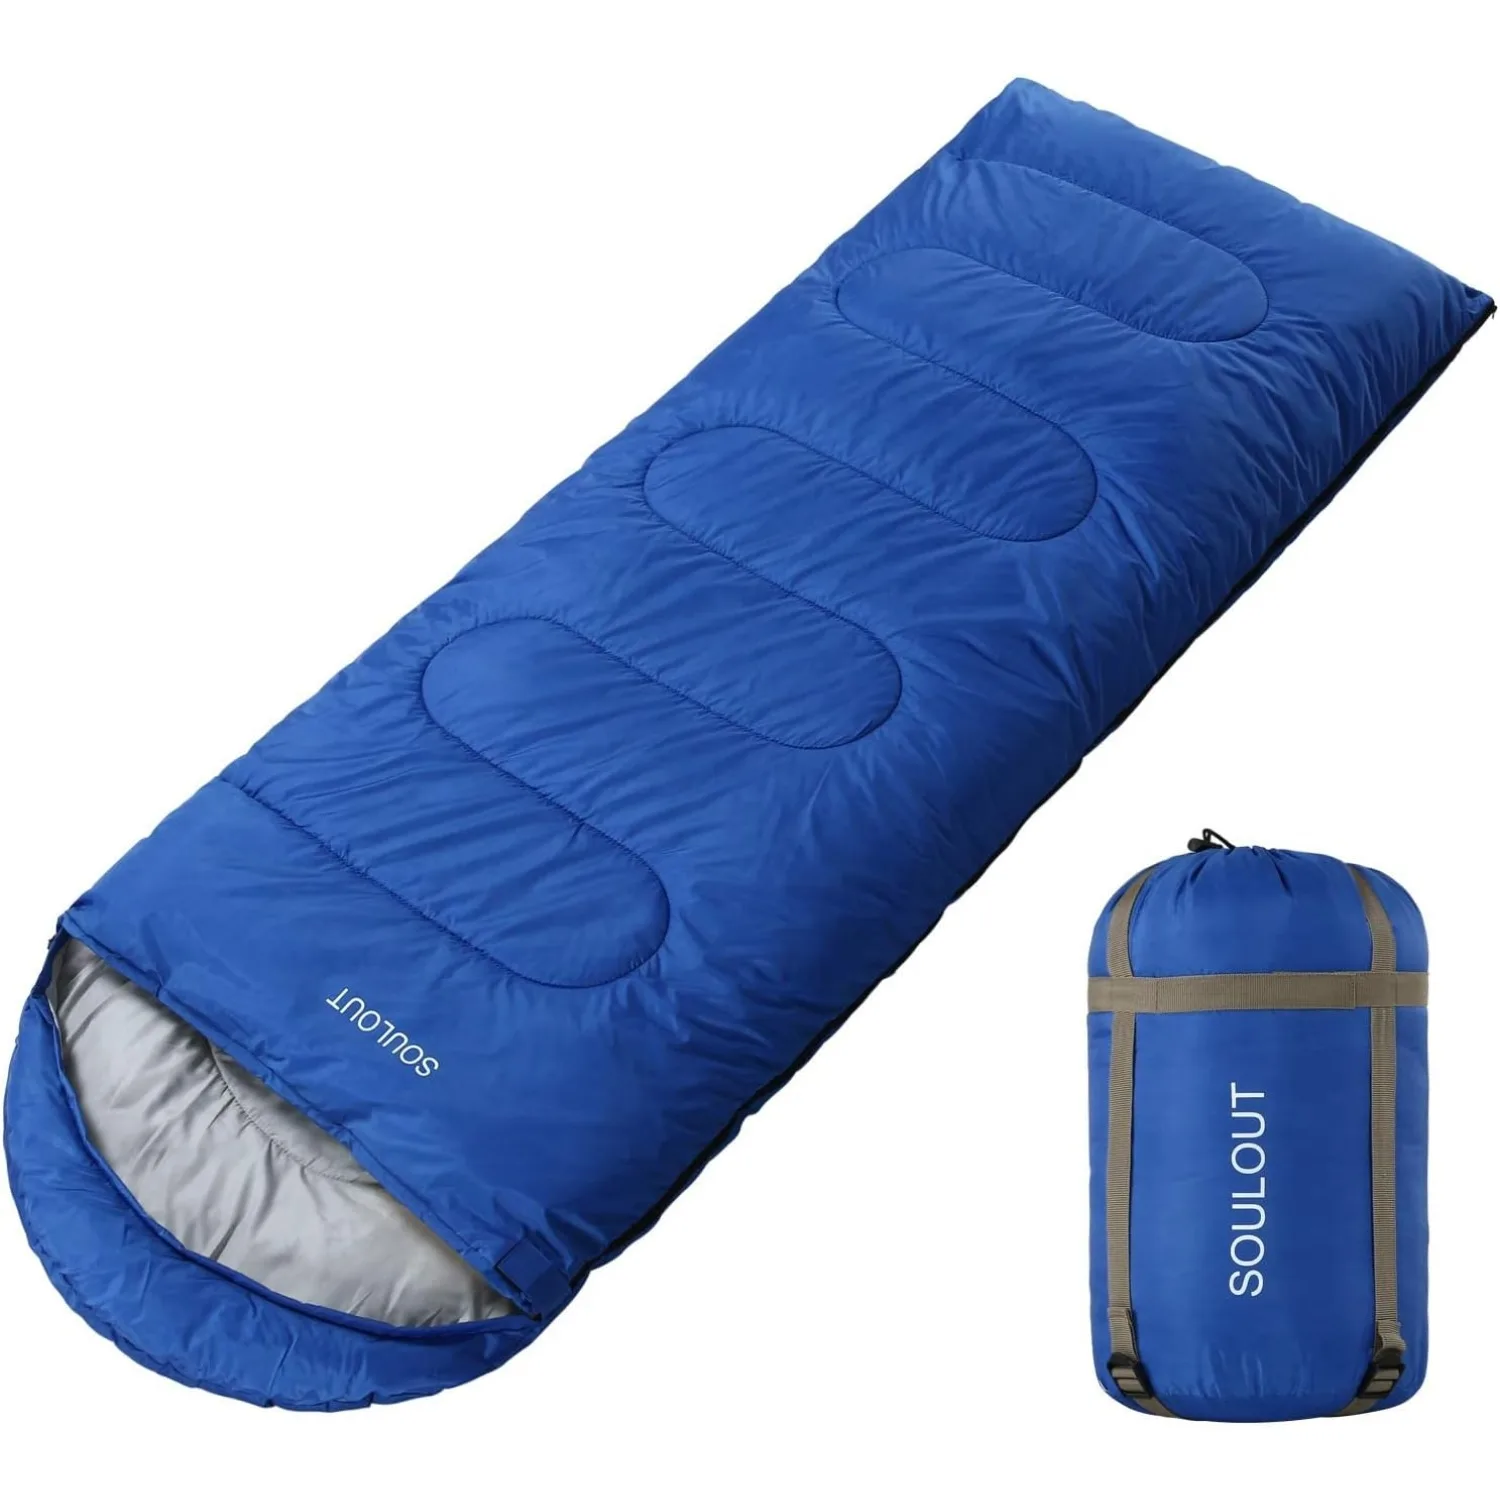 

Sleeping Bag,3-4 Seasons Warm Cold Weather Lightweight, Portable, Waterproof Sleeping Bag with Compression Sack for Adults